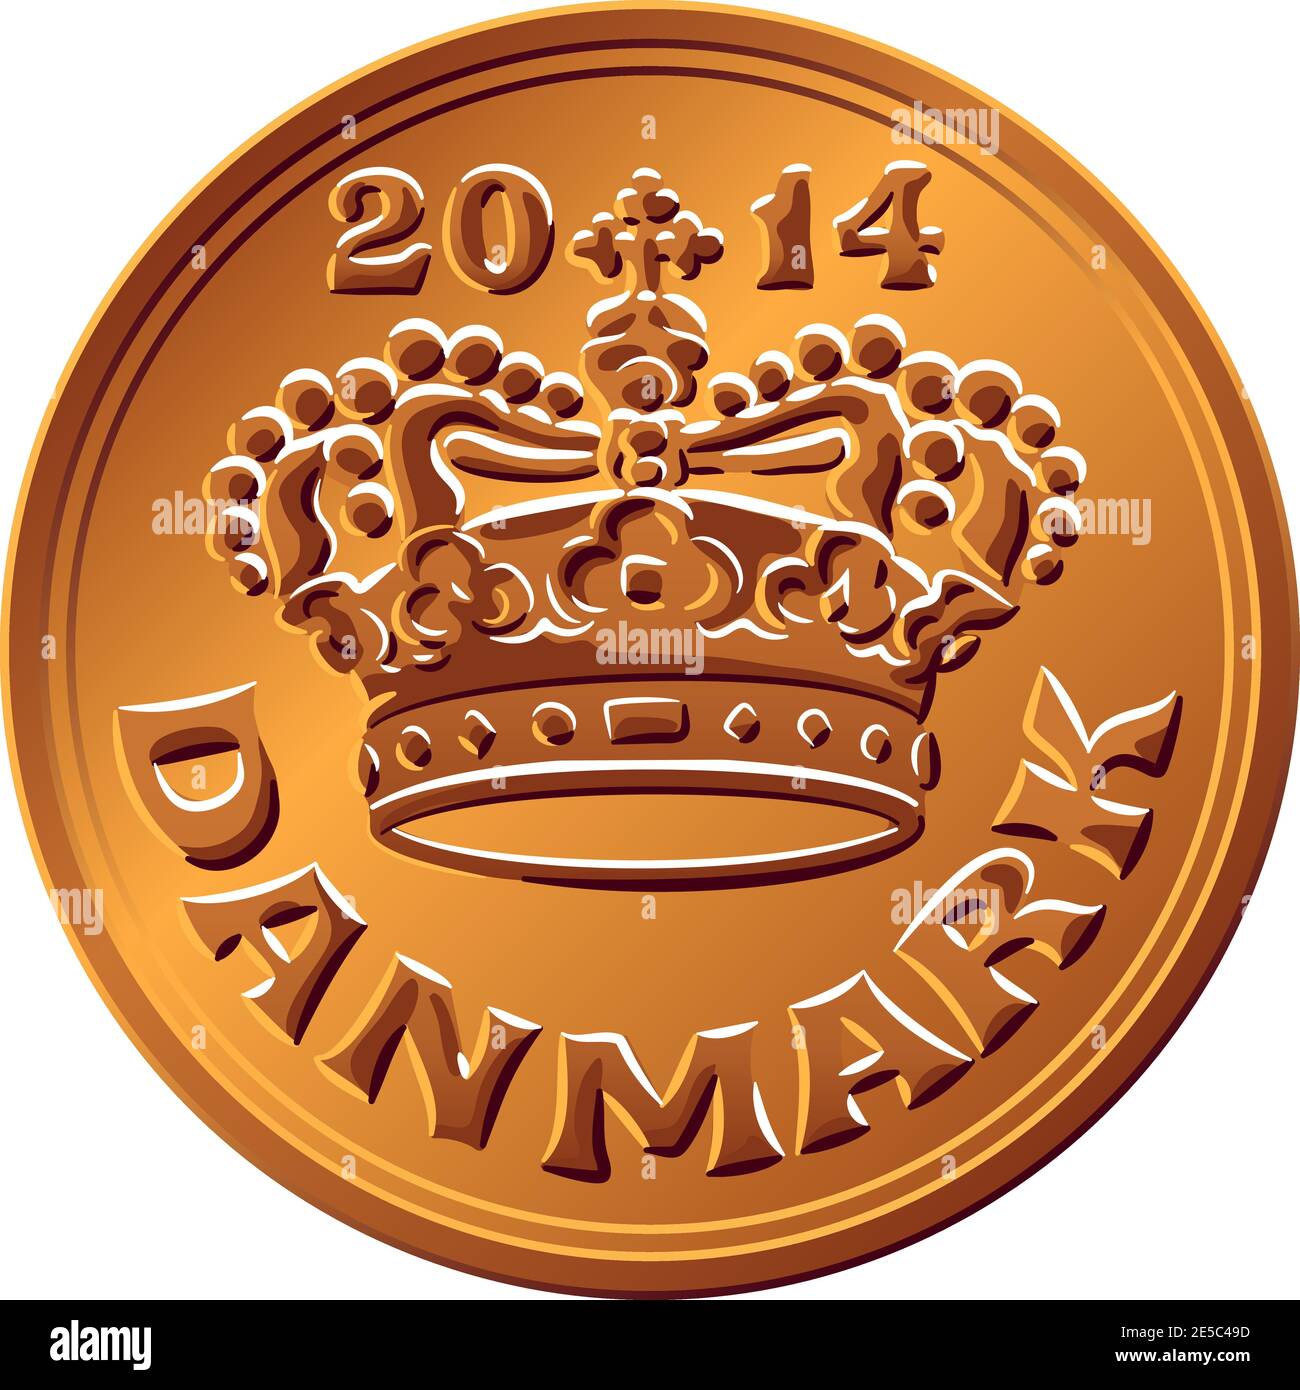 Danish money tin-bronze 50 ore coin. Krone, official currency of Denmark, Greenland, and the Faroe Islands. Stock Vector